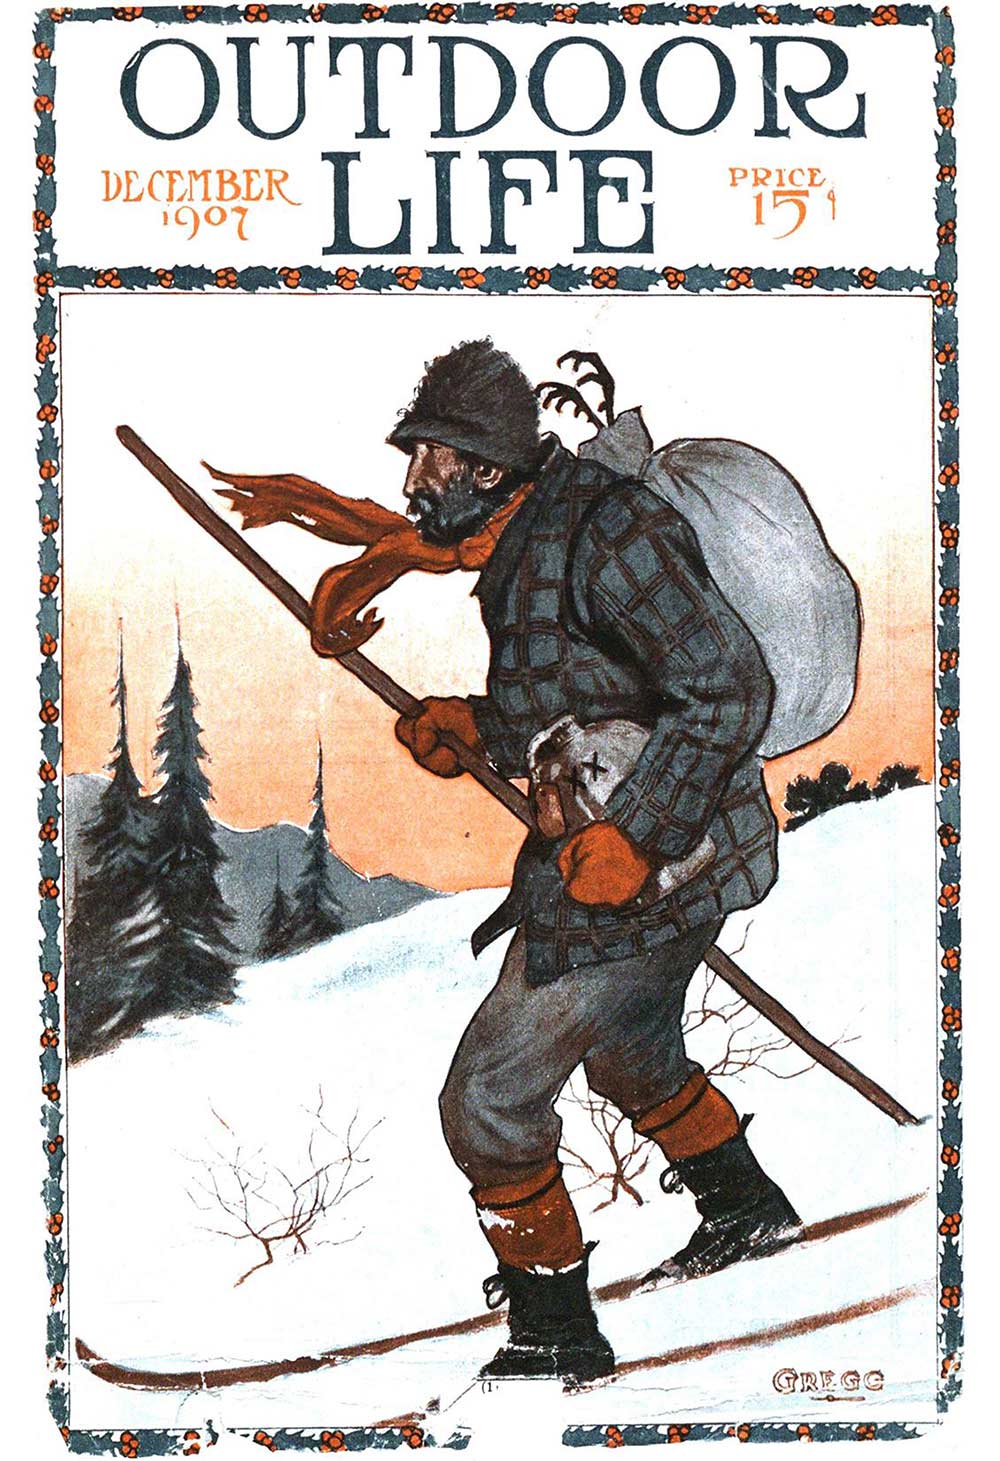 December 1907 Cover of Outdoor Life